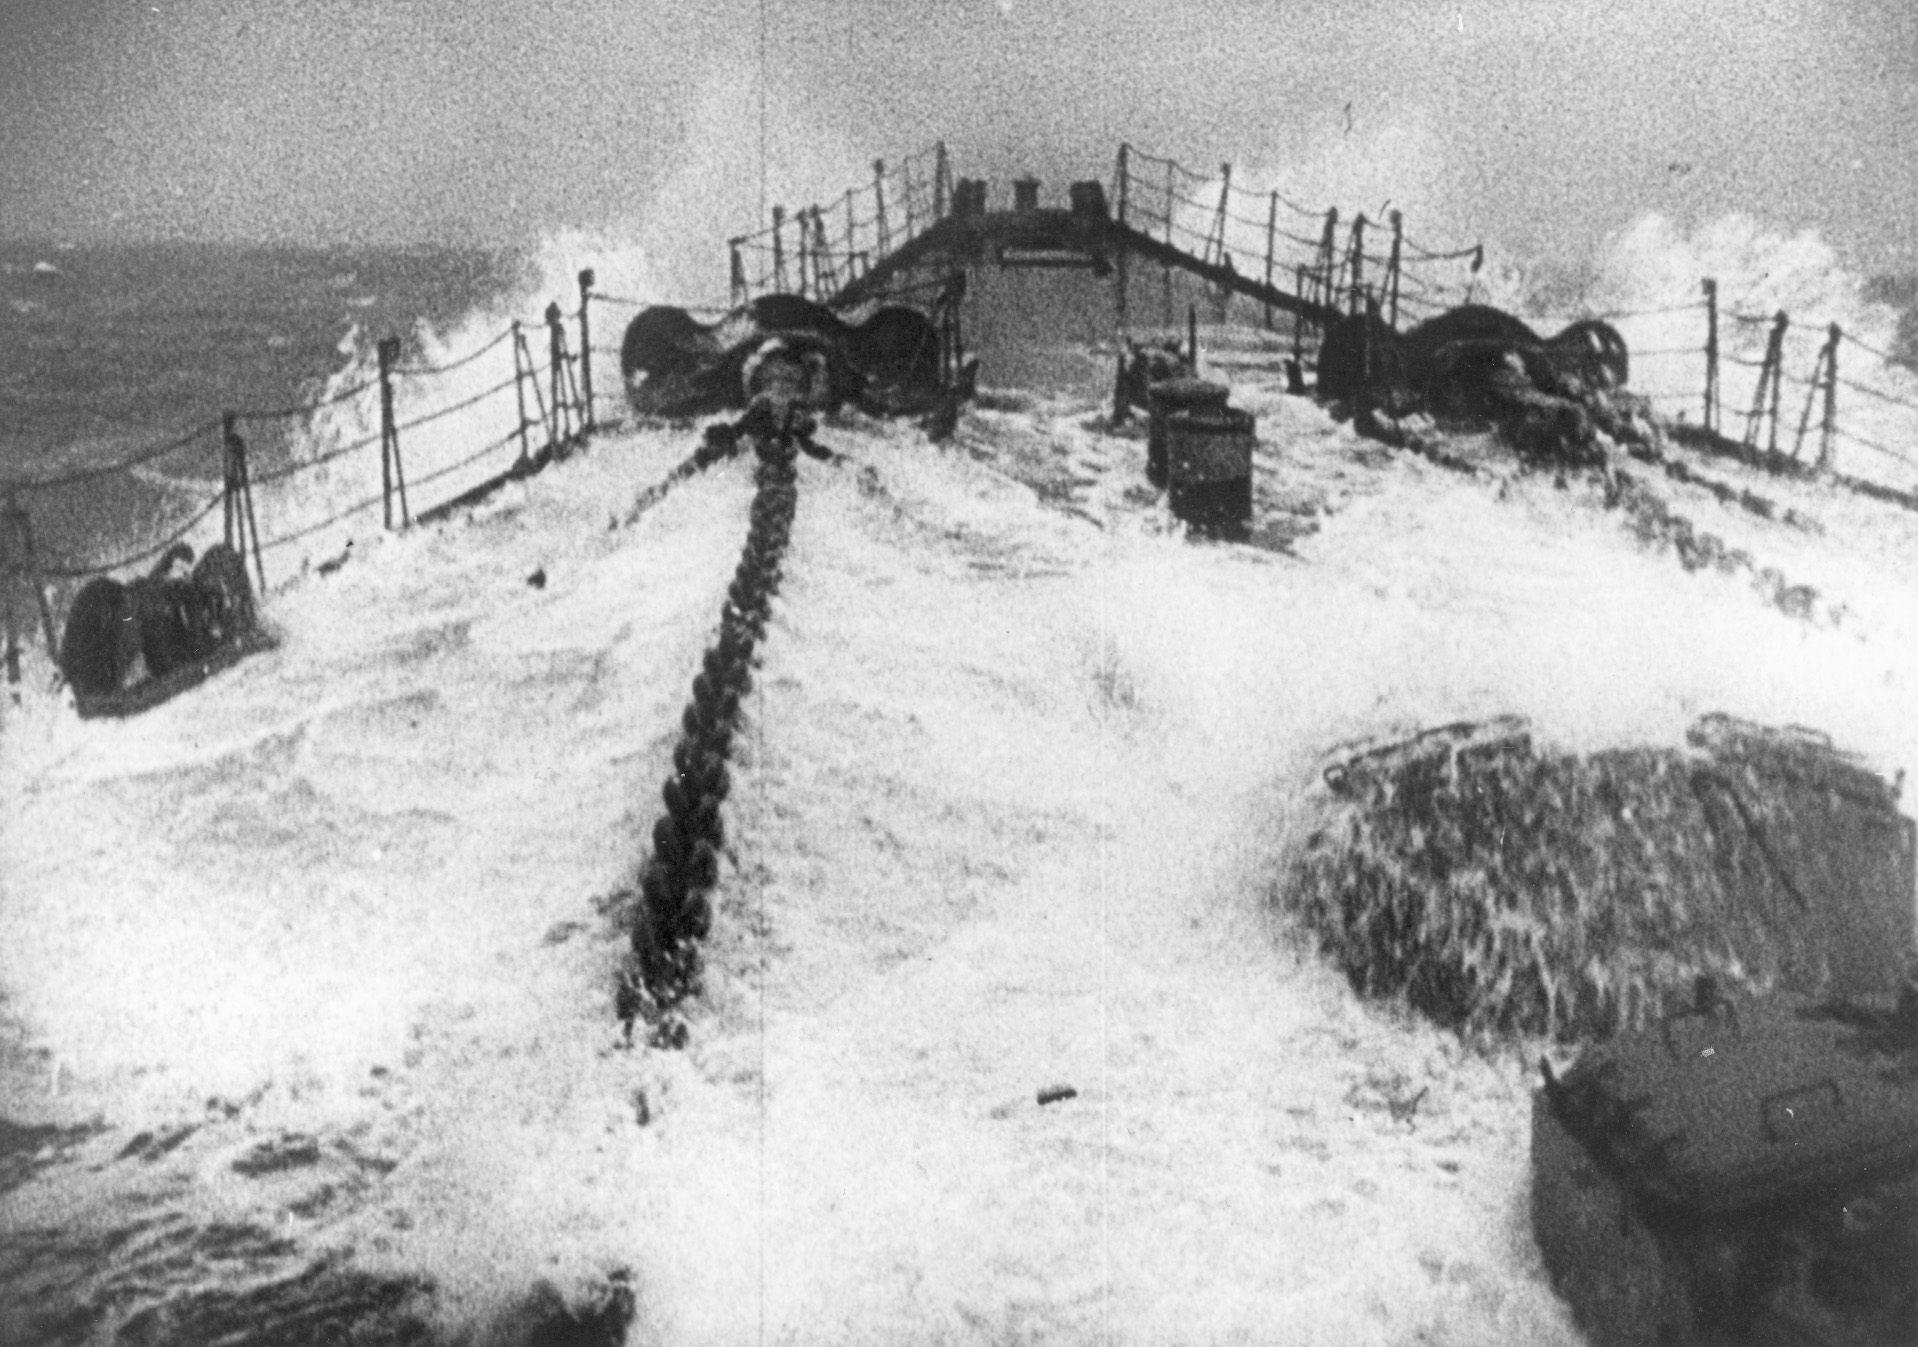 Water cascades across the bow of a German vessel in a still from a Nazi newsreel titled “Channel Dash.” Scharnhorst made the perilous journey to northern waters on February 12, 1942, in company with sister battlecruiser Gneisenau and cruiser Prinz Eugen. 